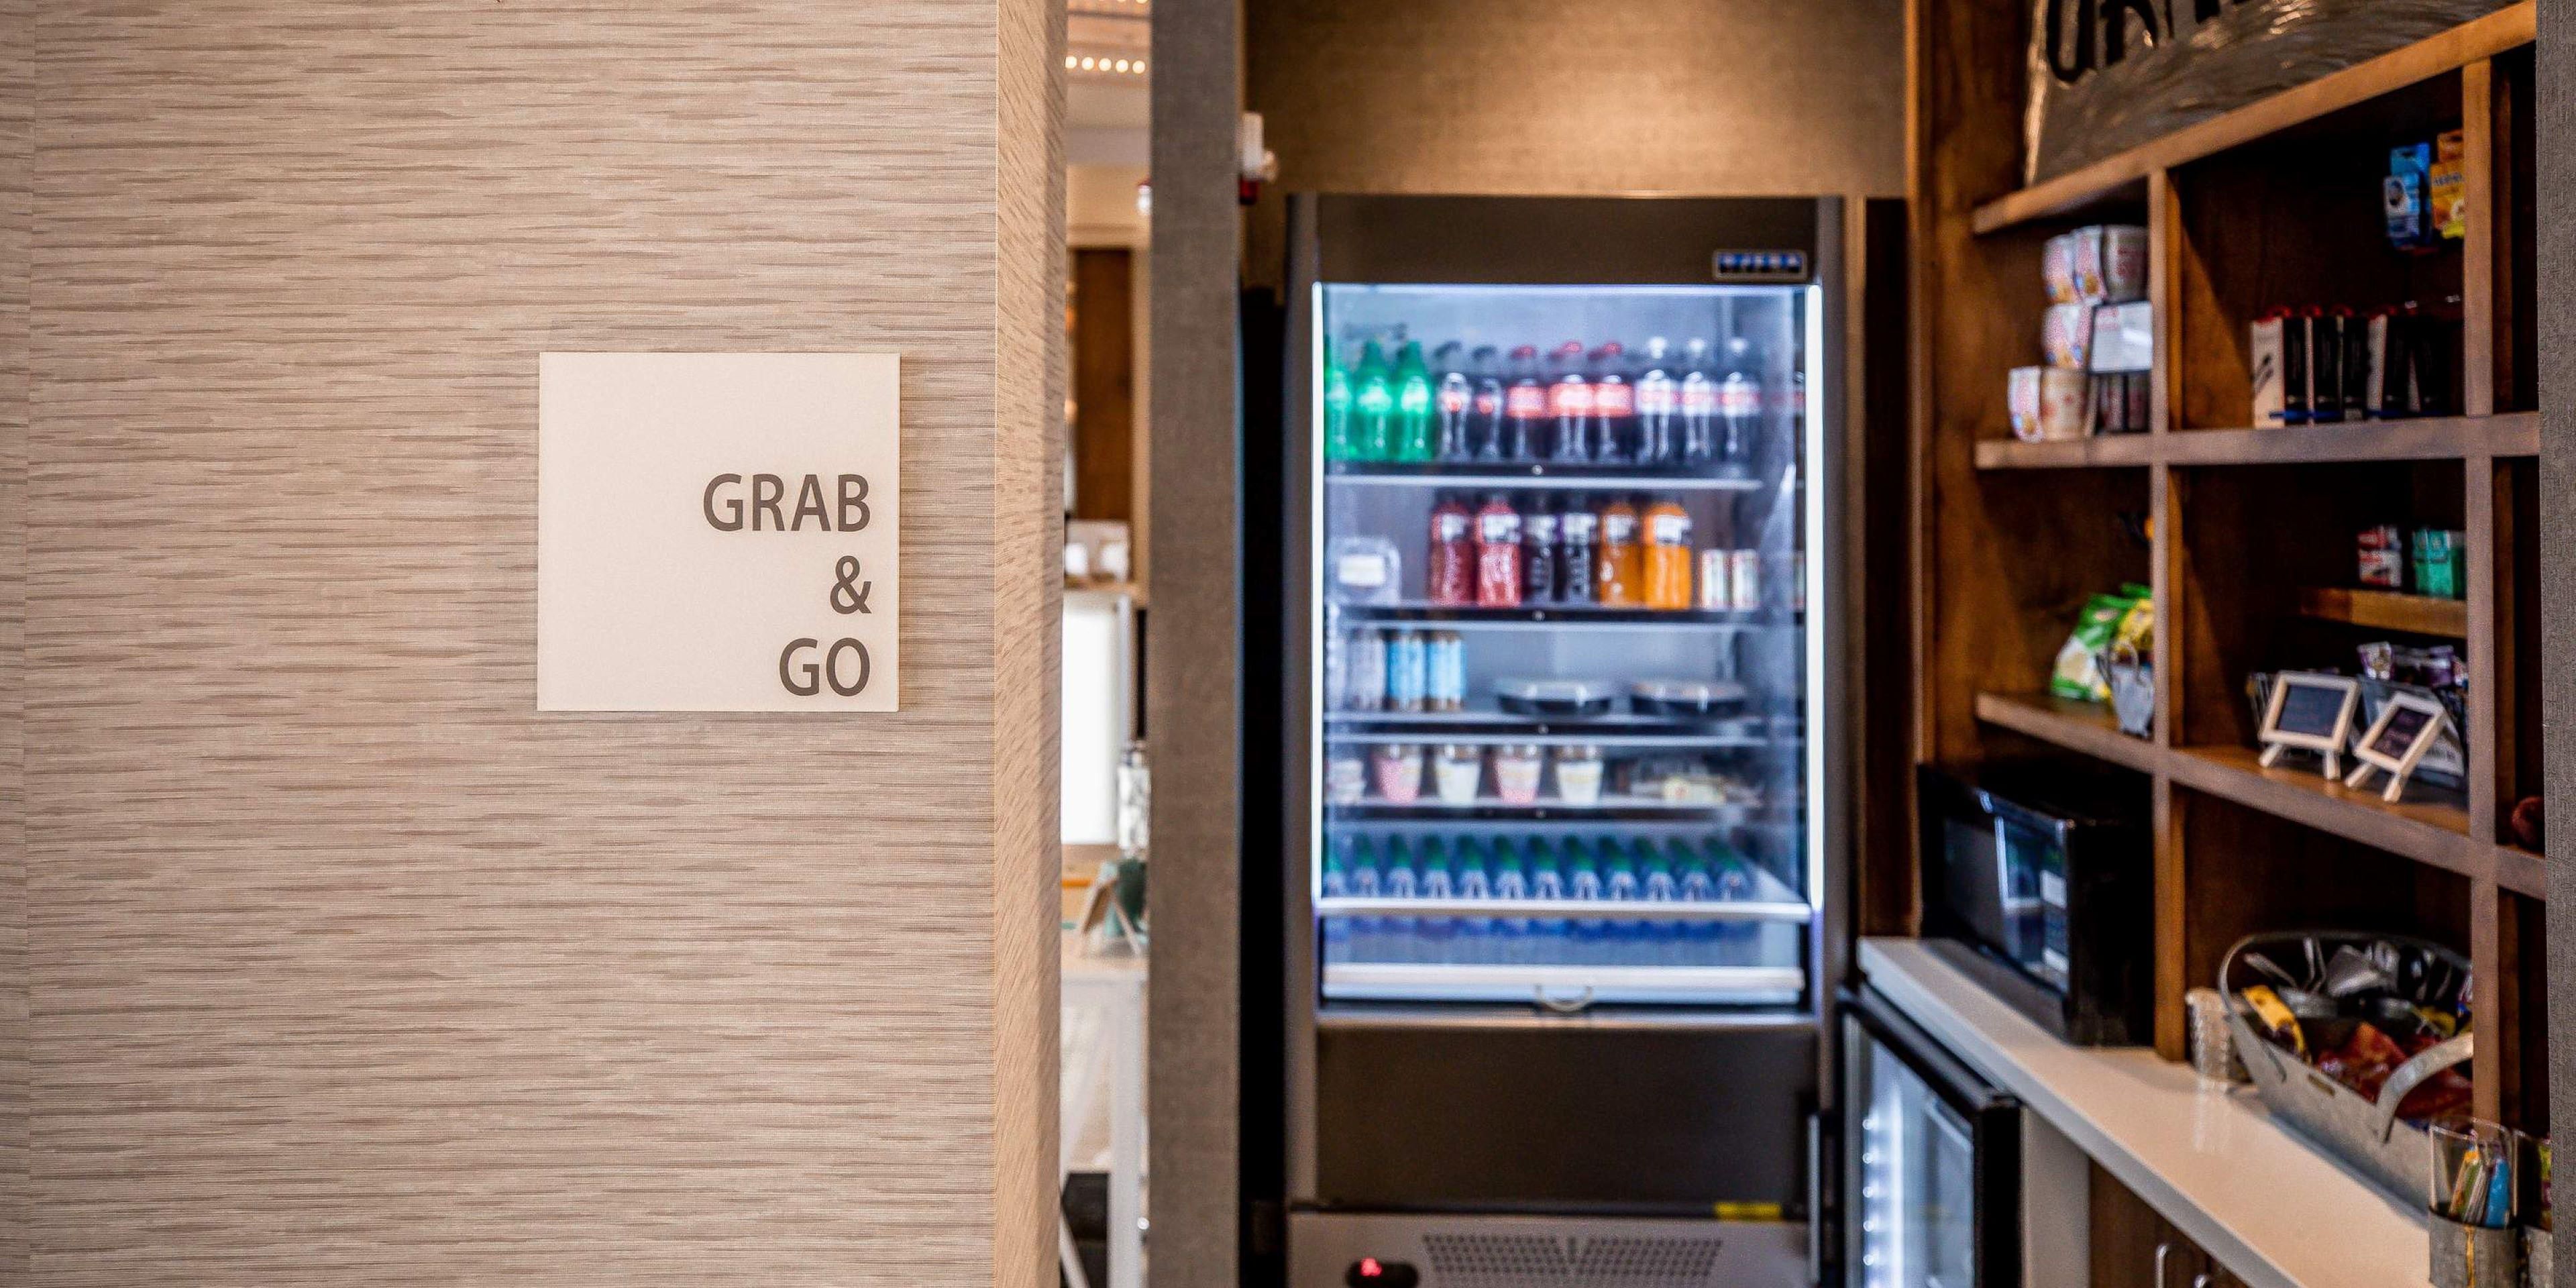 In a hurry? Hotel Indigo also offers a variety of Grab & Go items!